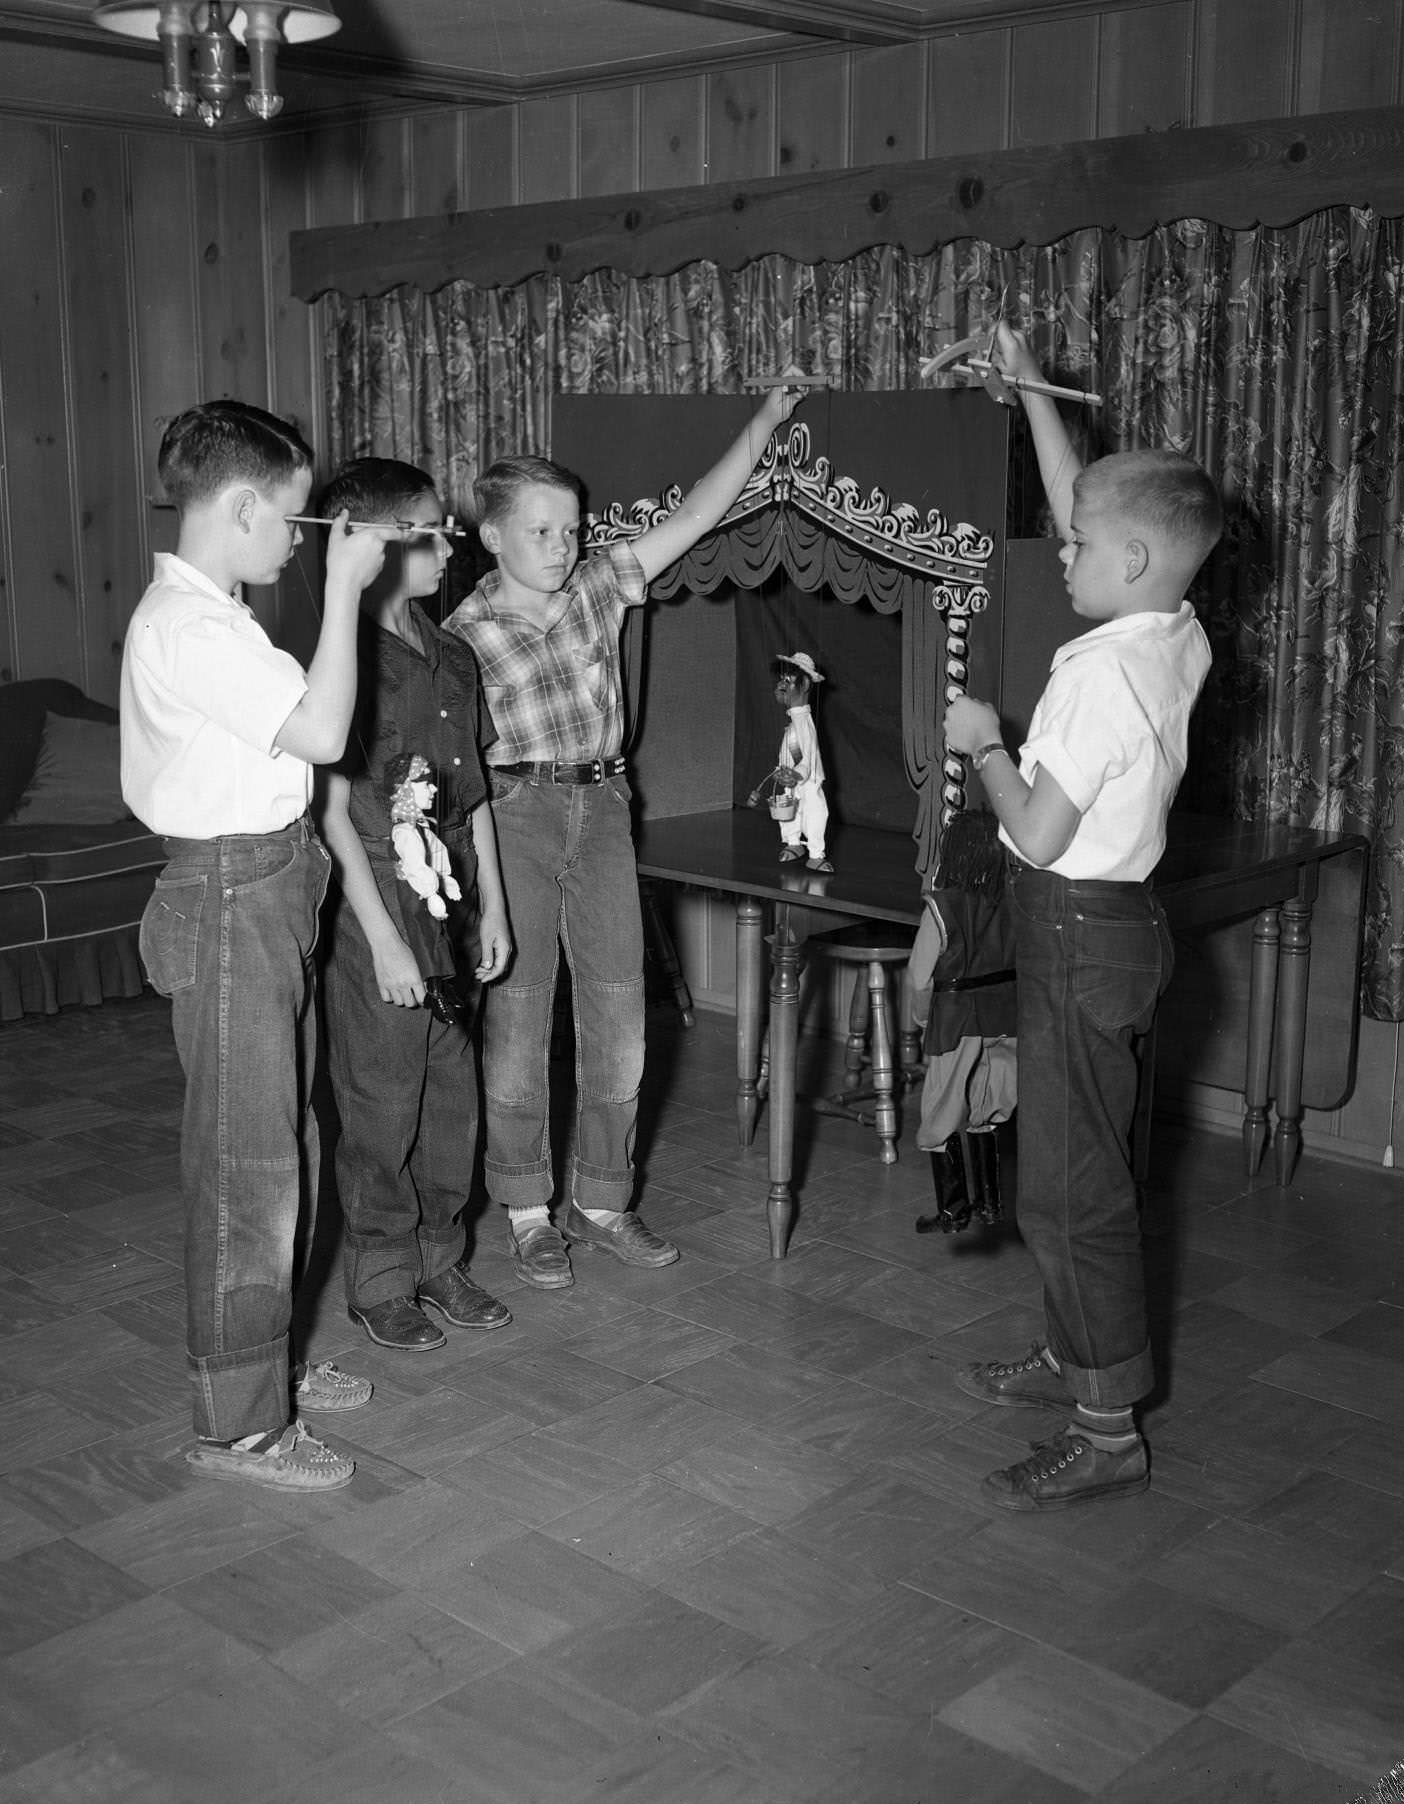 Four young boys playing with puppets, 1958. By the children there is a table with what seems to be a puppet theater box on it.